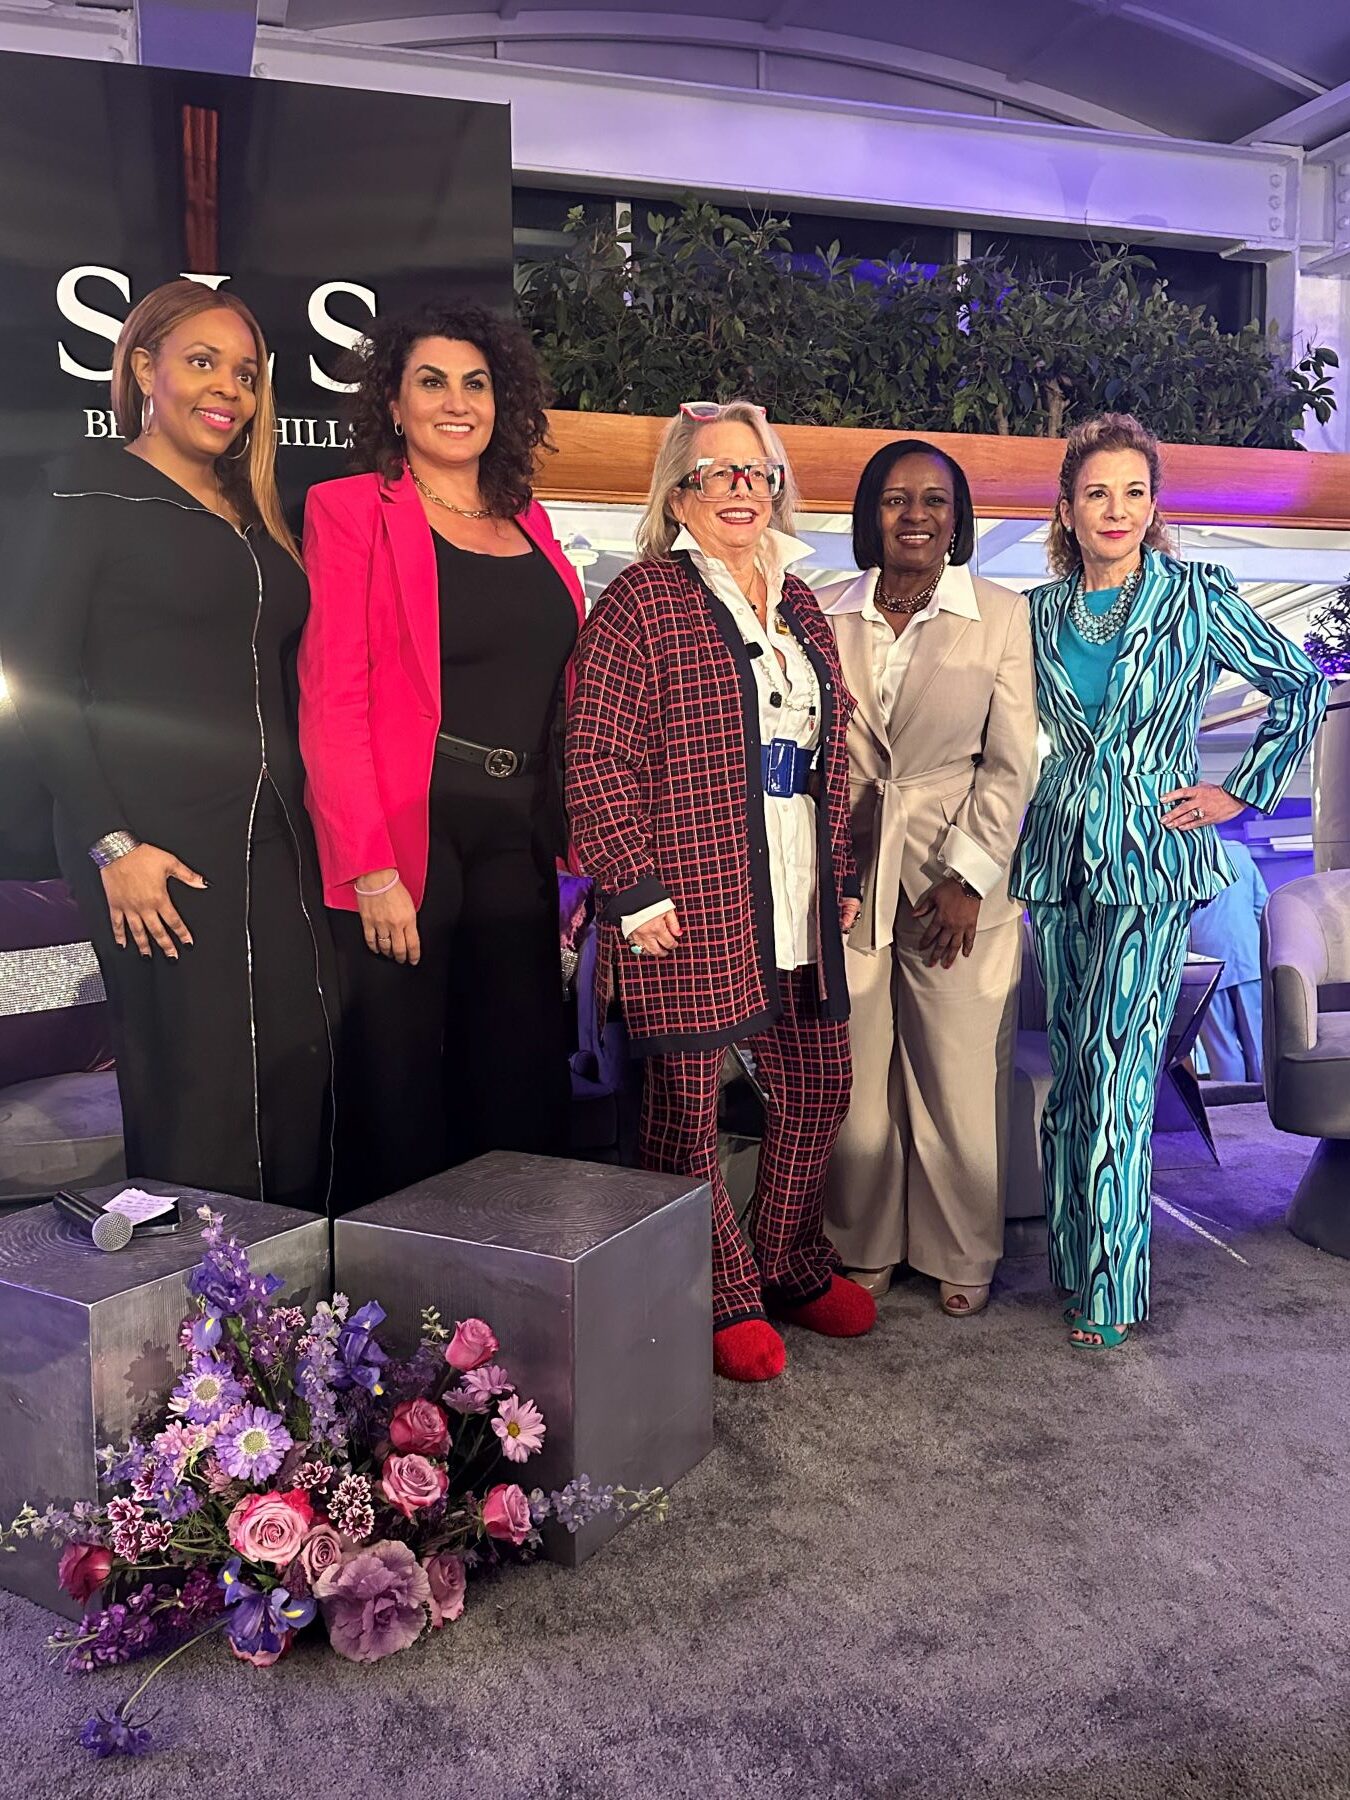 An image of the key panelists from the SLS International Women's Day event.